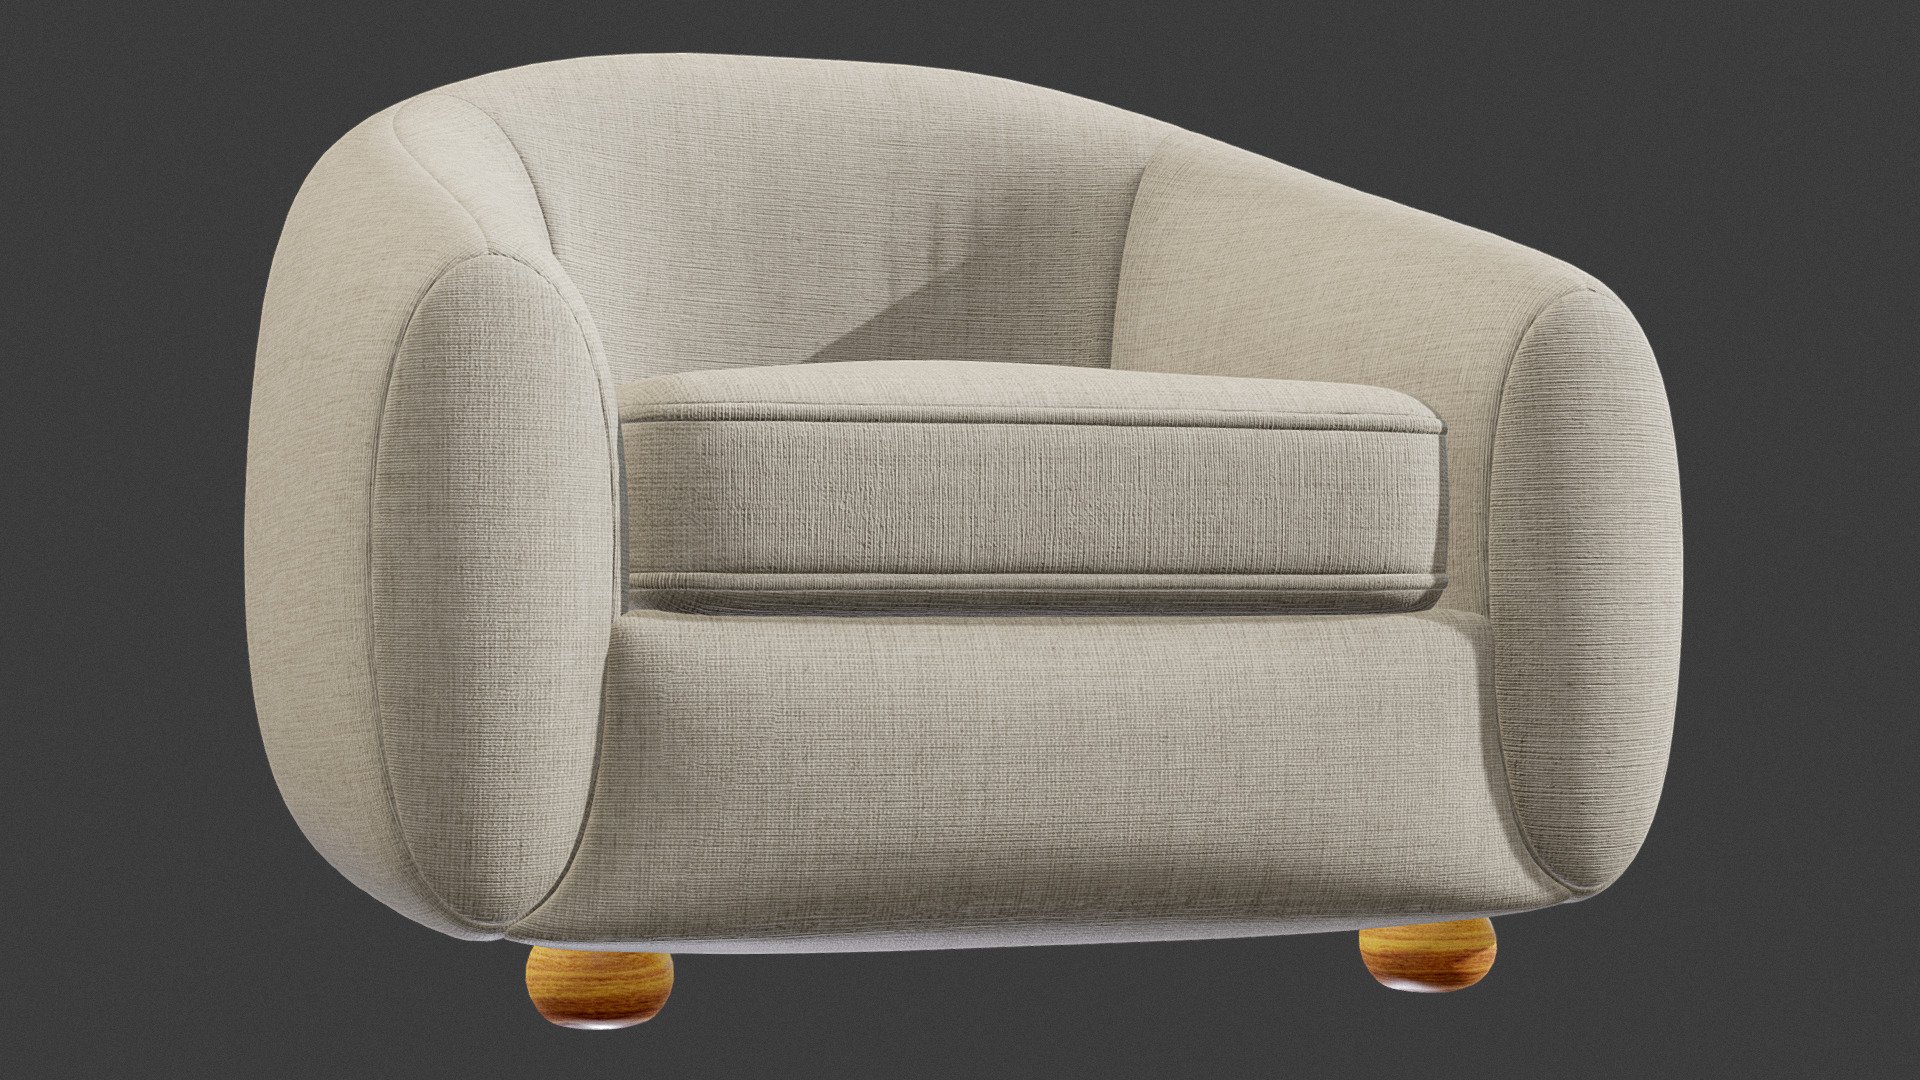 -no plugins/modifiers etc
-model fully UVs unwrapped 
-diffuse texture size: 8192x8192
-model was made in real size
-scene units measurement: millimeters
-dimensions: 82.2 H x 108.3 W x 98.8 (cm) - Yoji Chair - 3D model by TypicCube 3d model